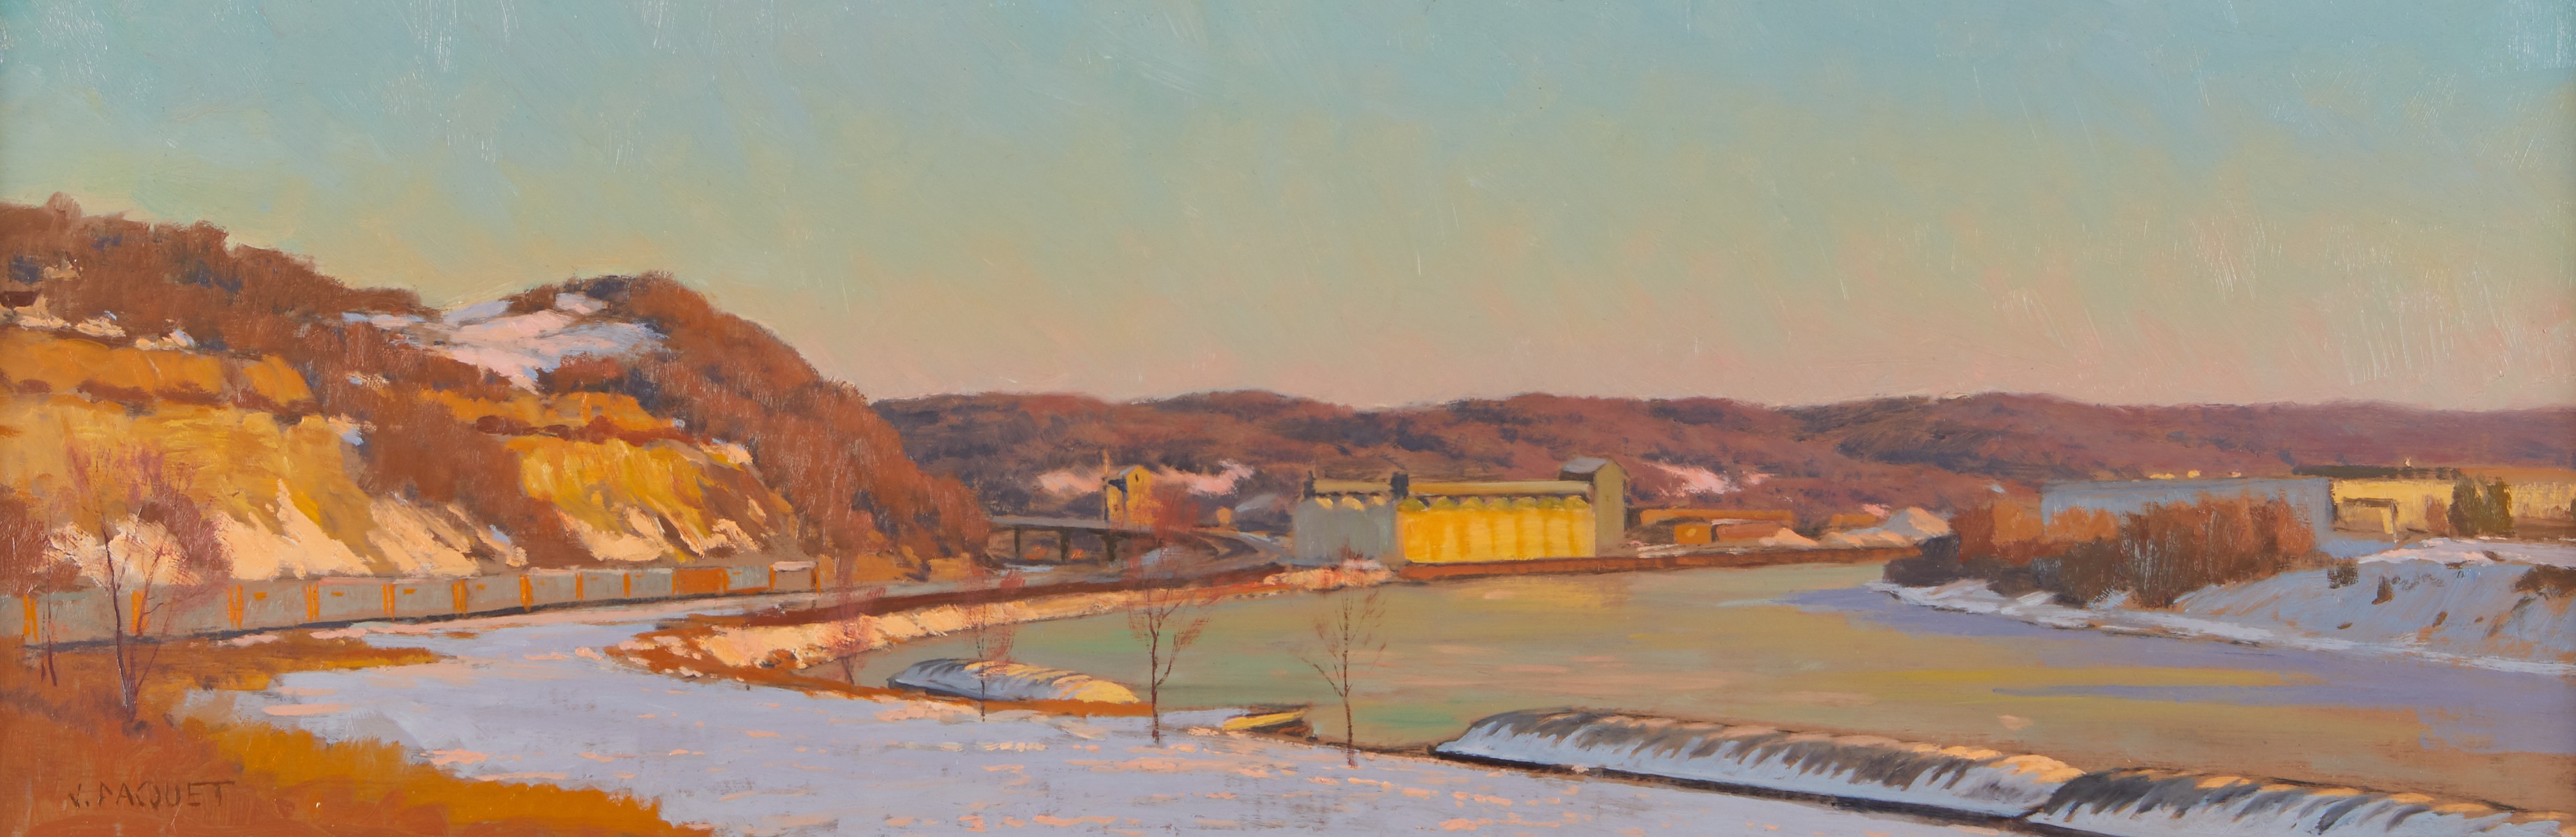 Joseph Paquet "Last Light View of Mounds" Painting - Image 2 of 5